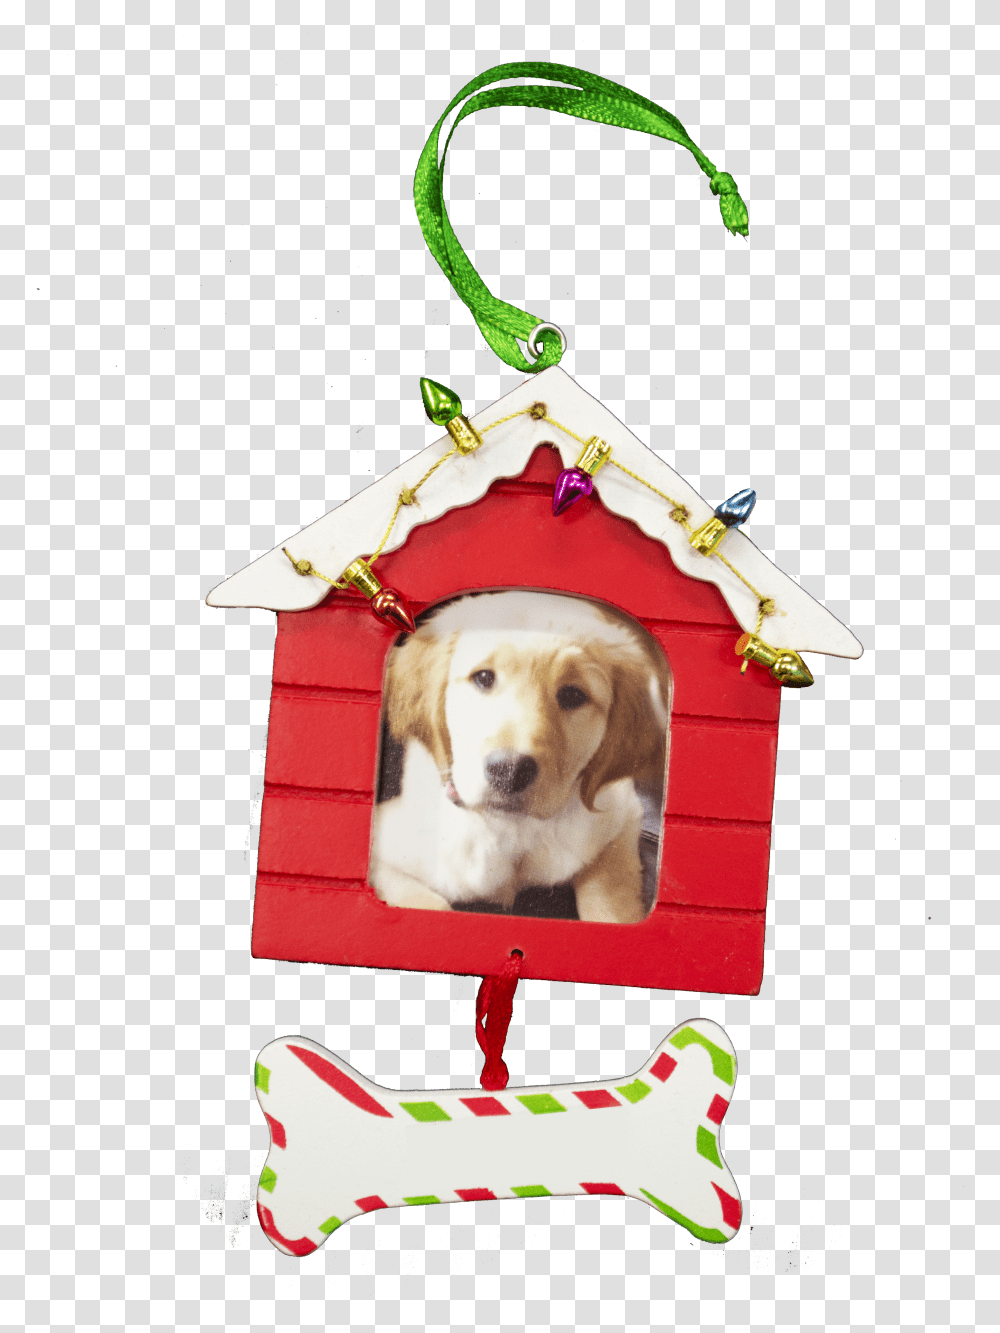 Doghouse Ornament Green Candy Cane Transparent Png